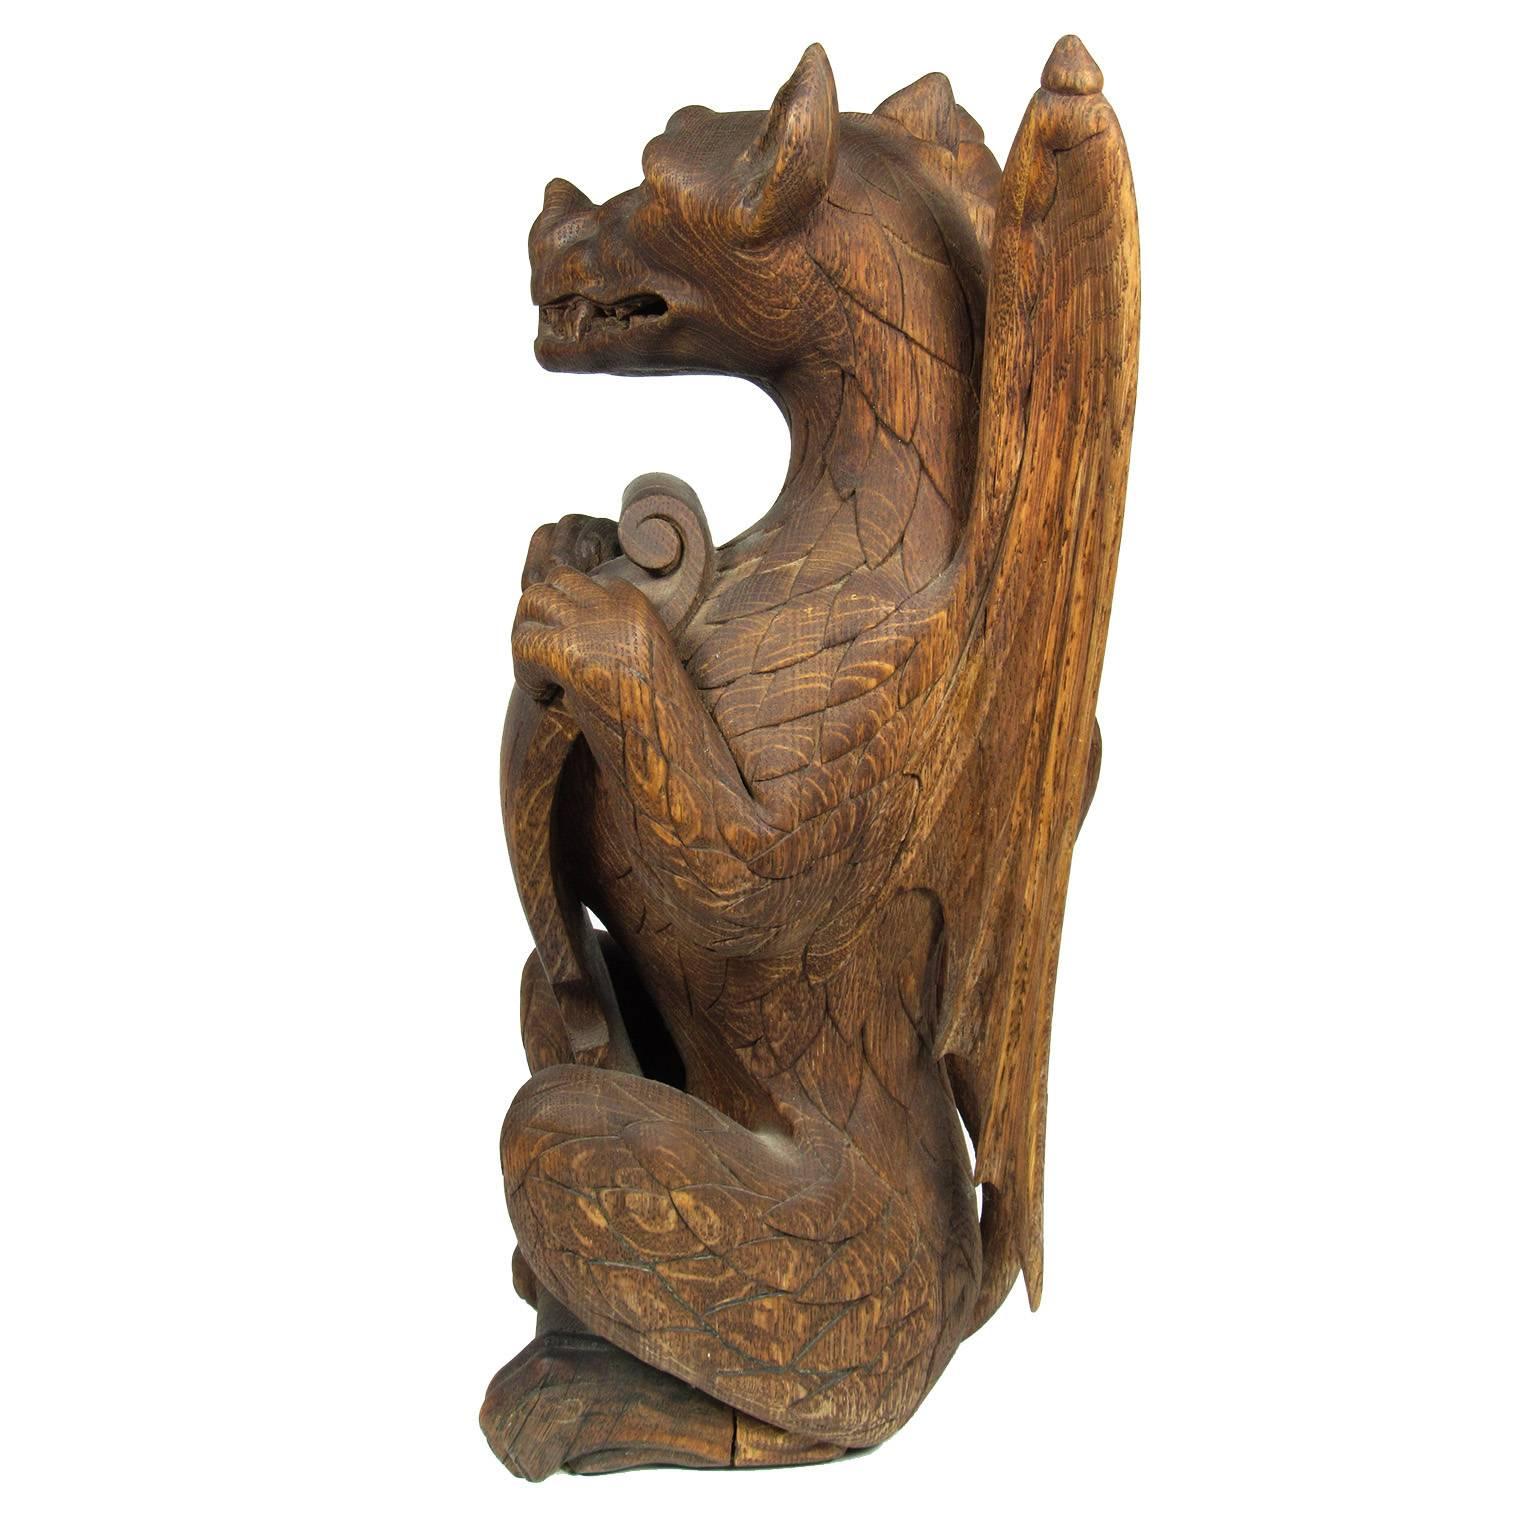 Dramatic 19th century carved wood figure of a dragon holding a shield with great patina;.
Measures: Height 17 inches, width 6 inches, depth 6 inches.